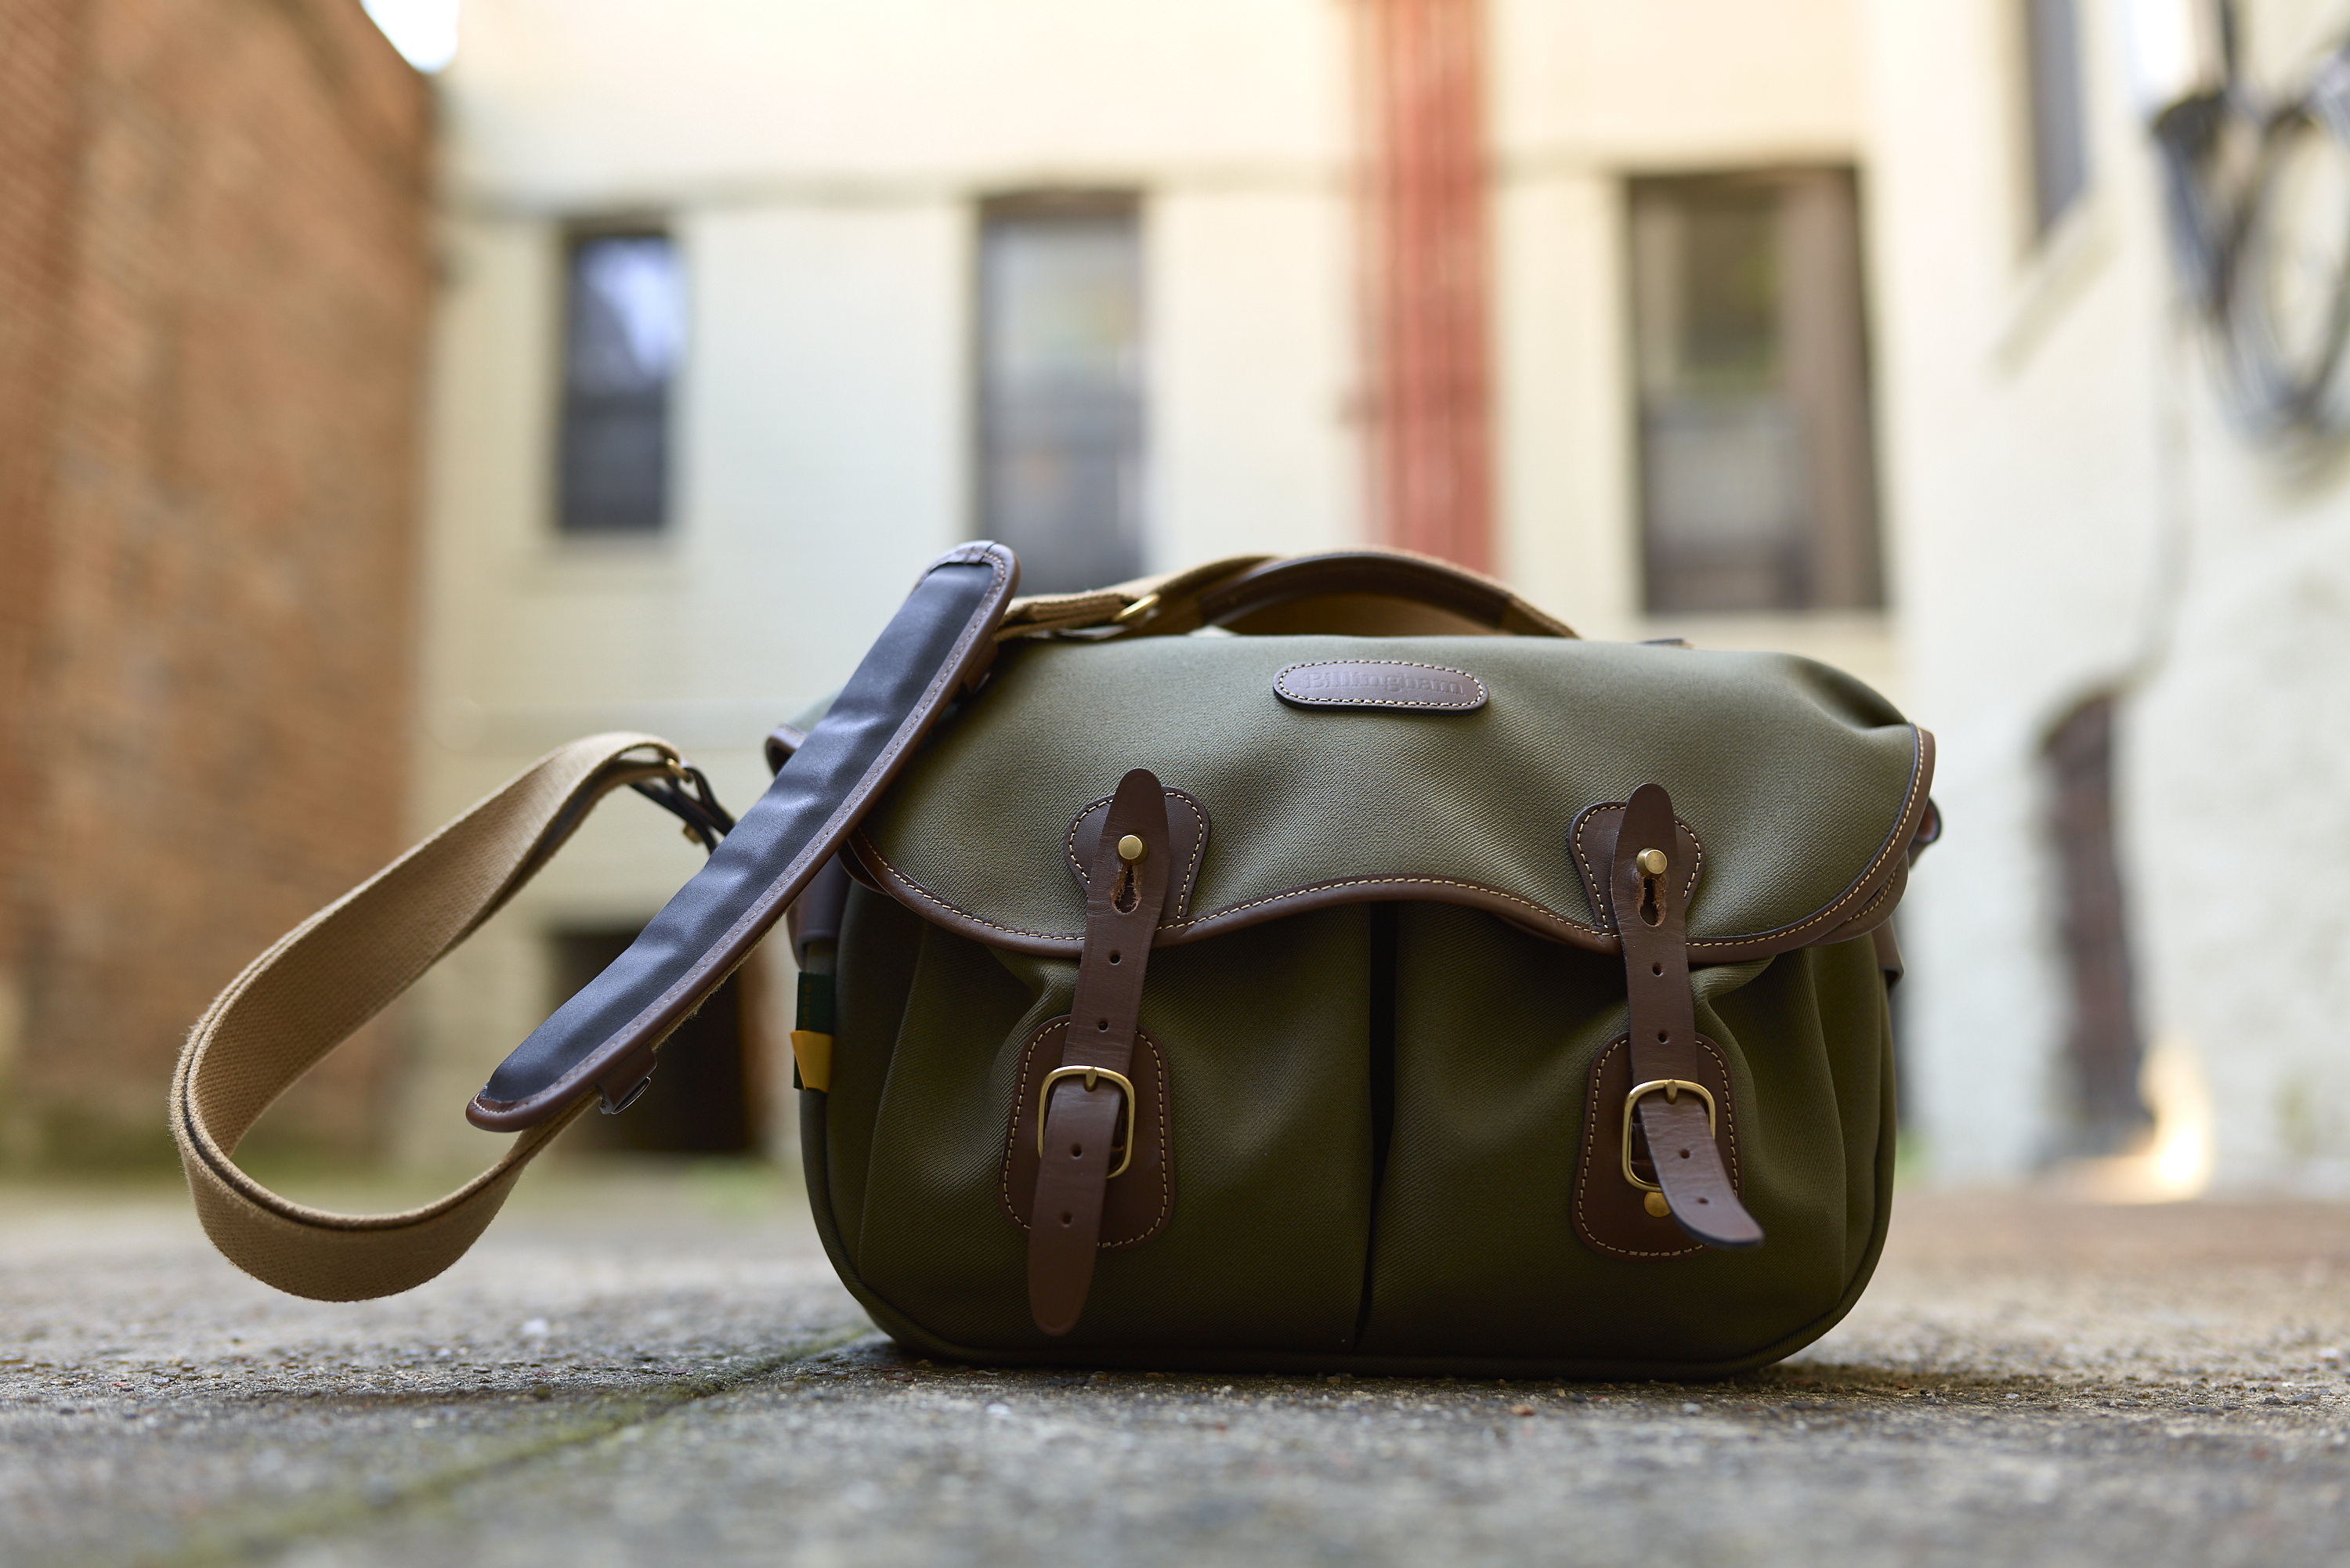 Three Fashionable Camera Bags for the Stylish Photographer (And One Strap You’ll Love)